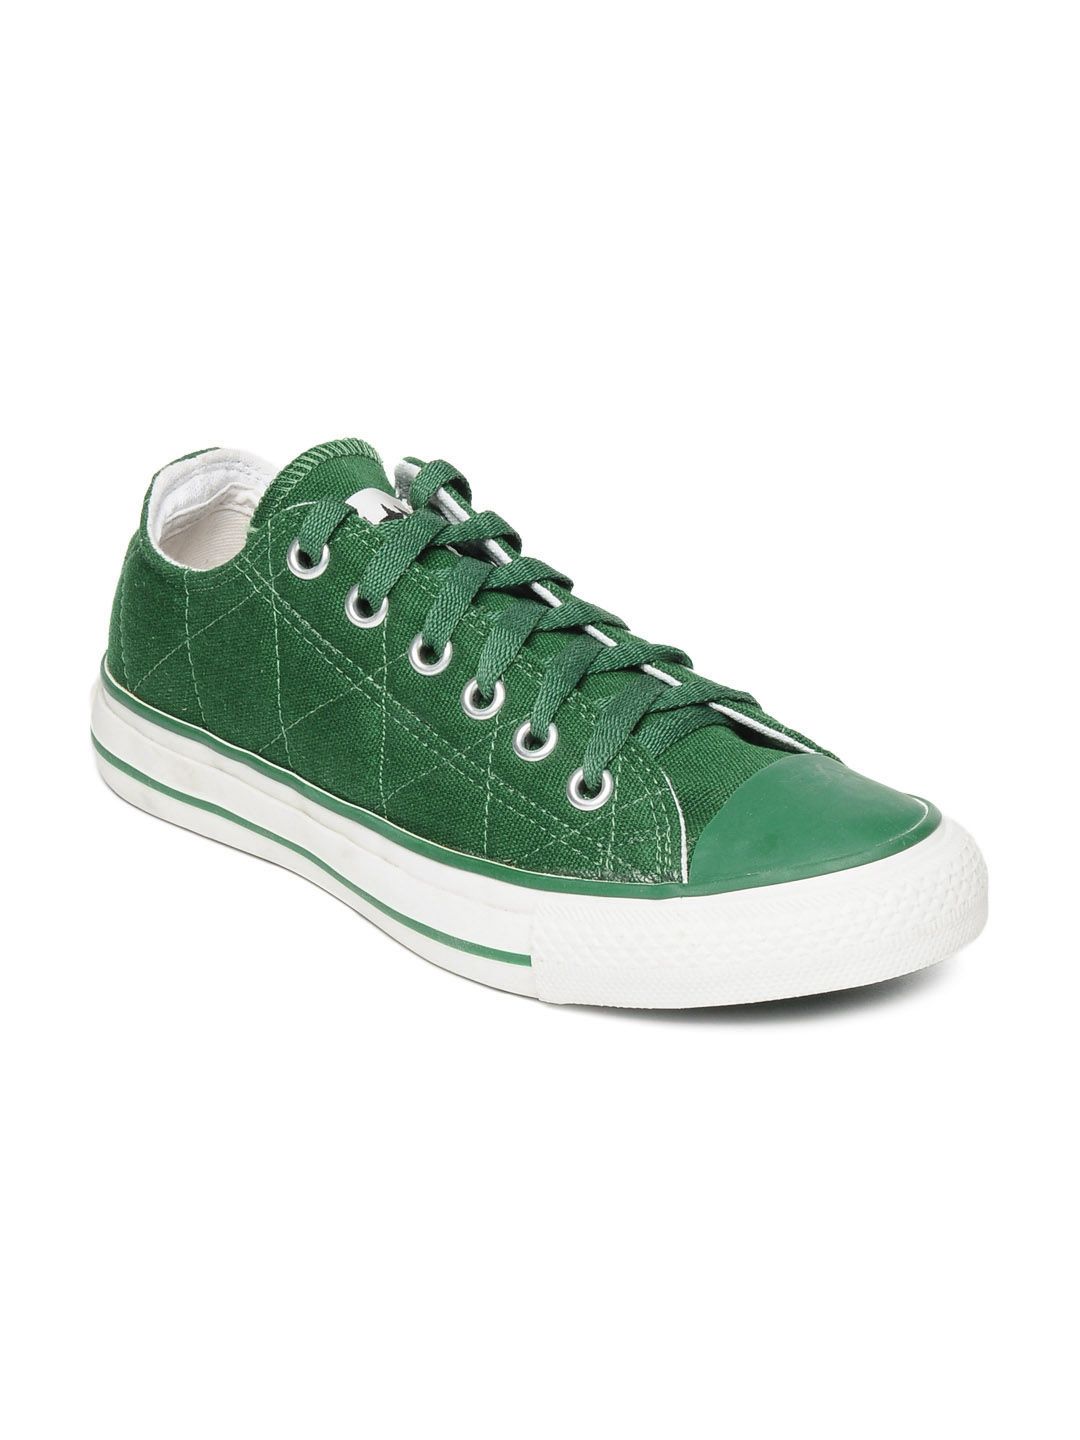 converse all star shoes price in india